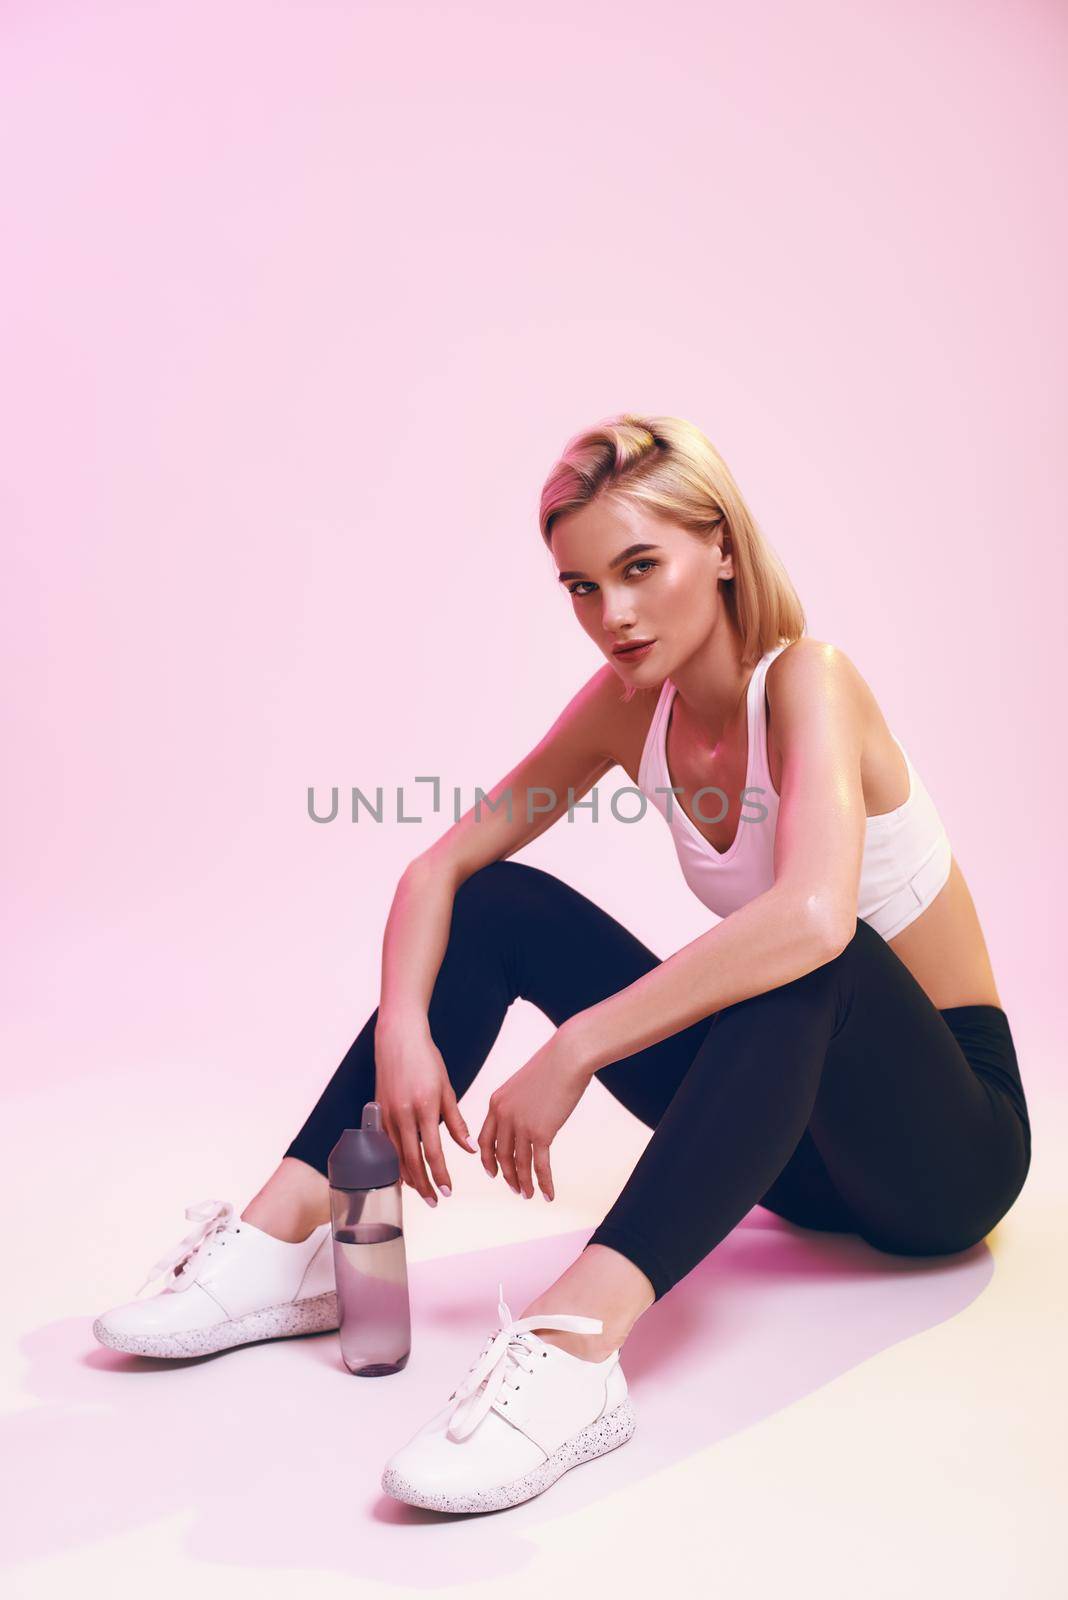 After workout. Cute and young sporty woman in sports clothing relaxing and looking at camera while sitting on the floor against pink background in studio. Sport. Active lifestyle